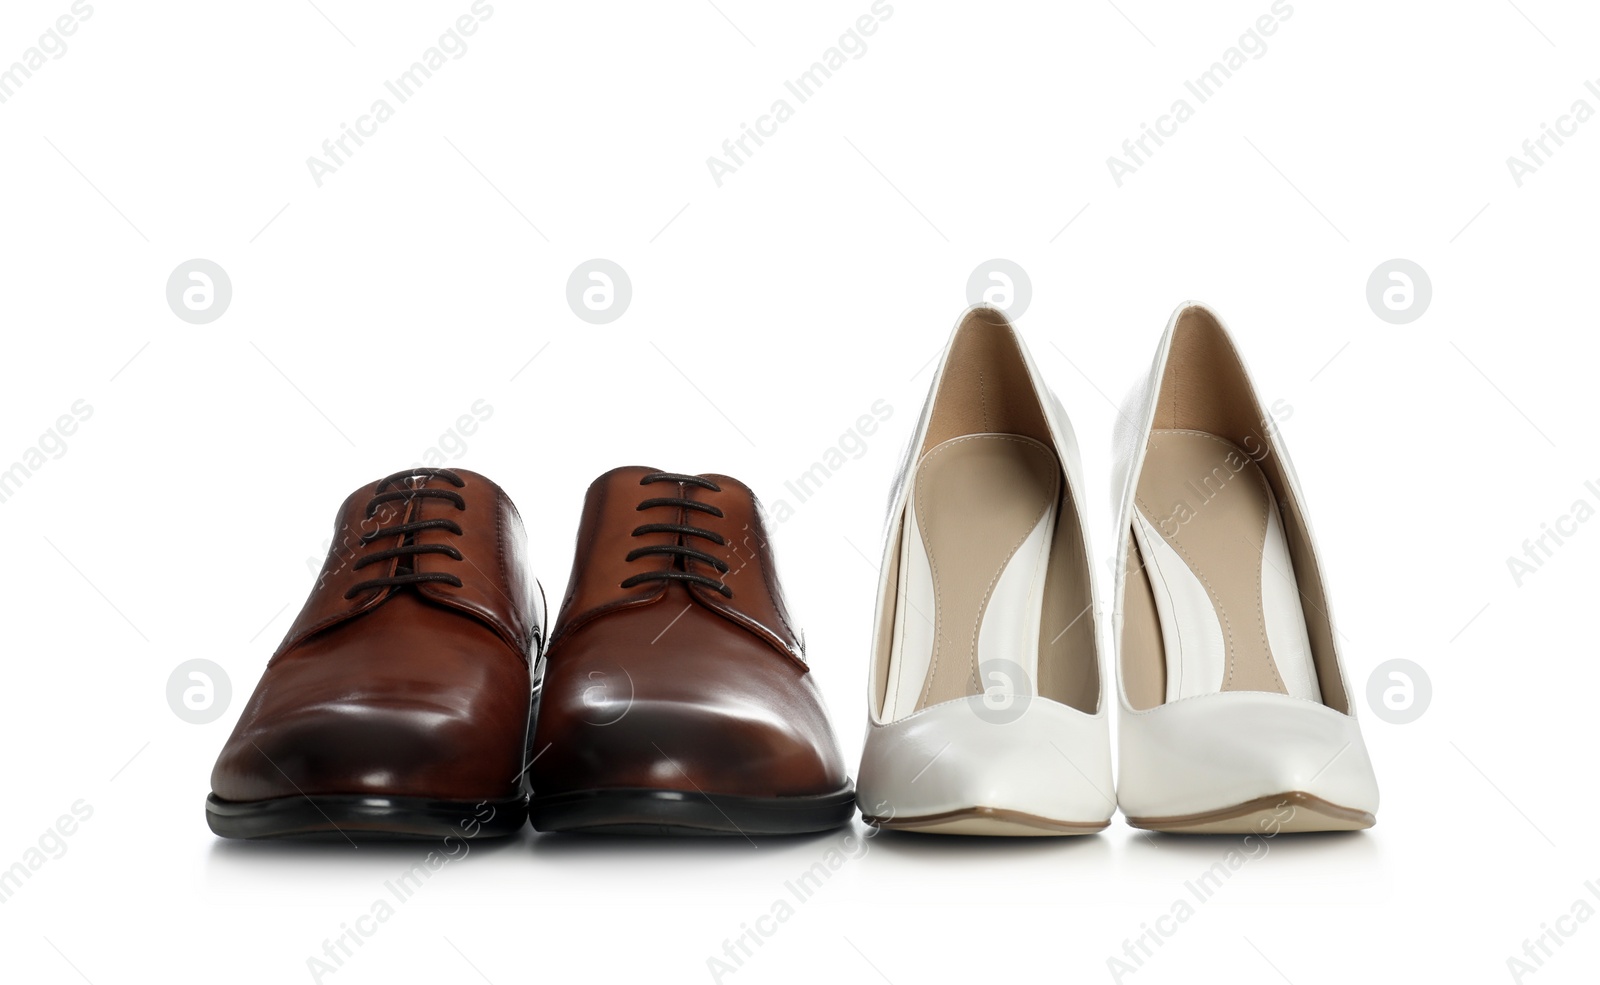 Photo of Classic wedding shoes for bride and groom on white background